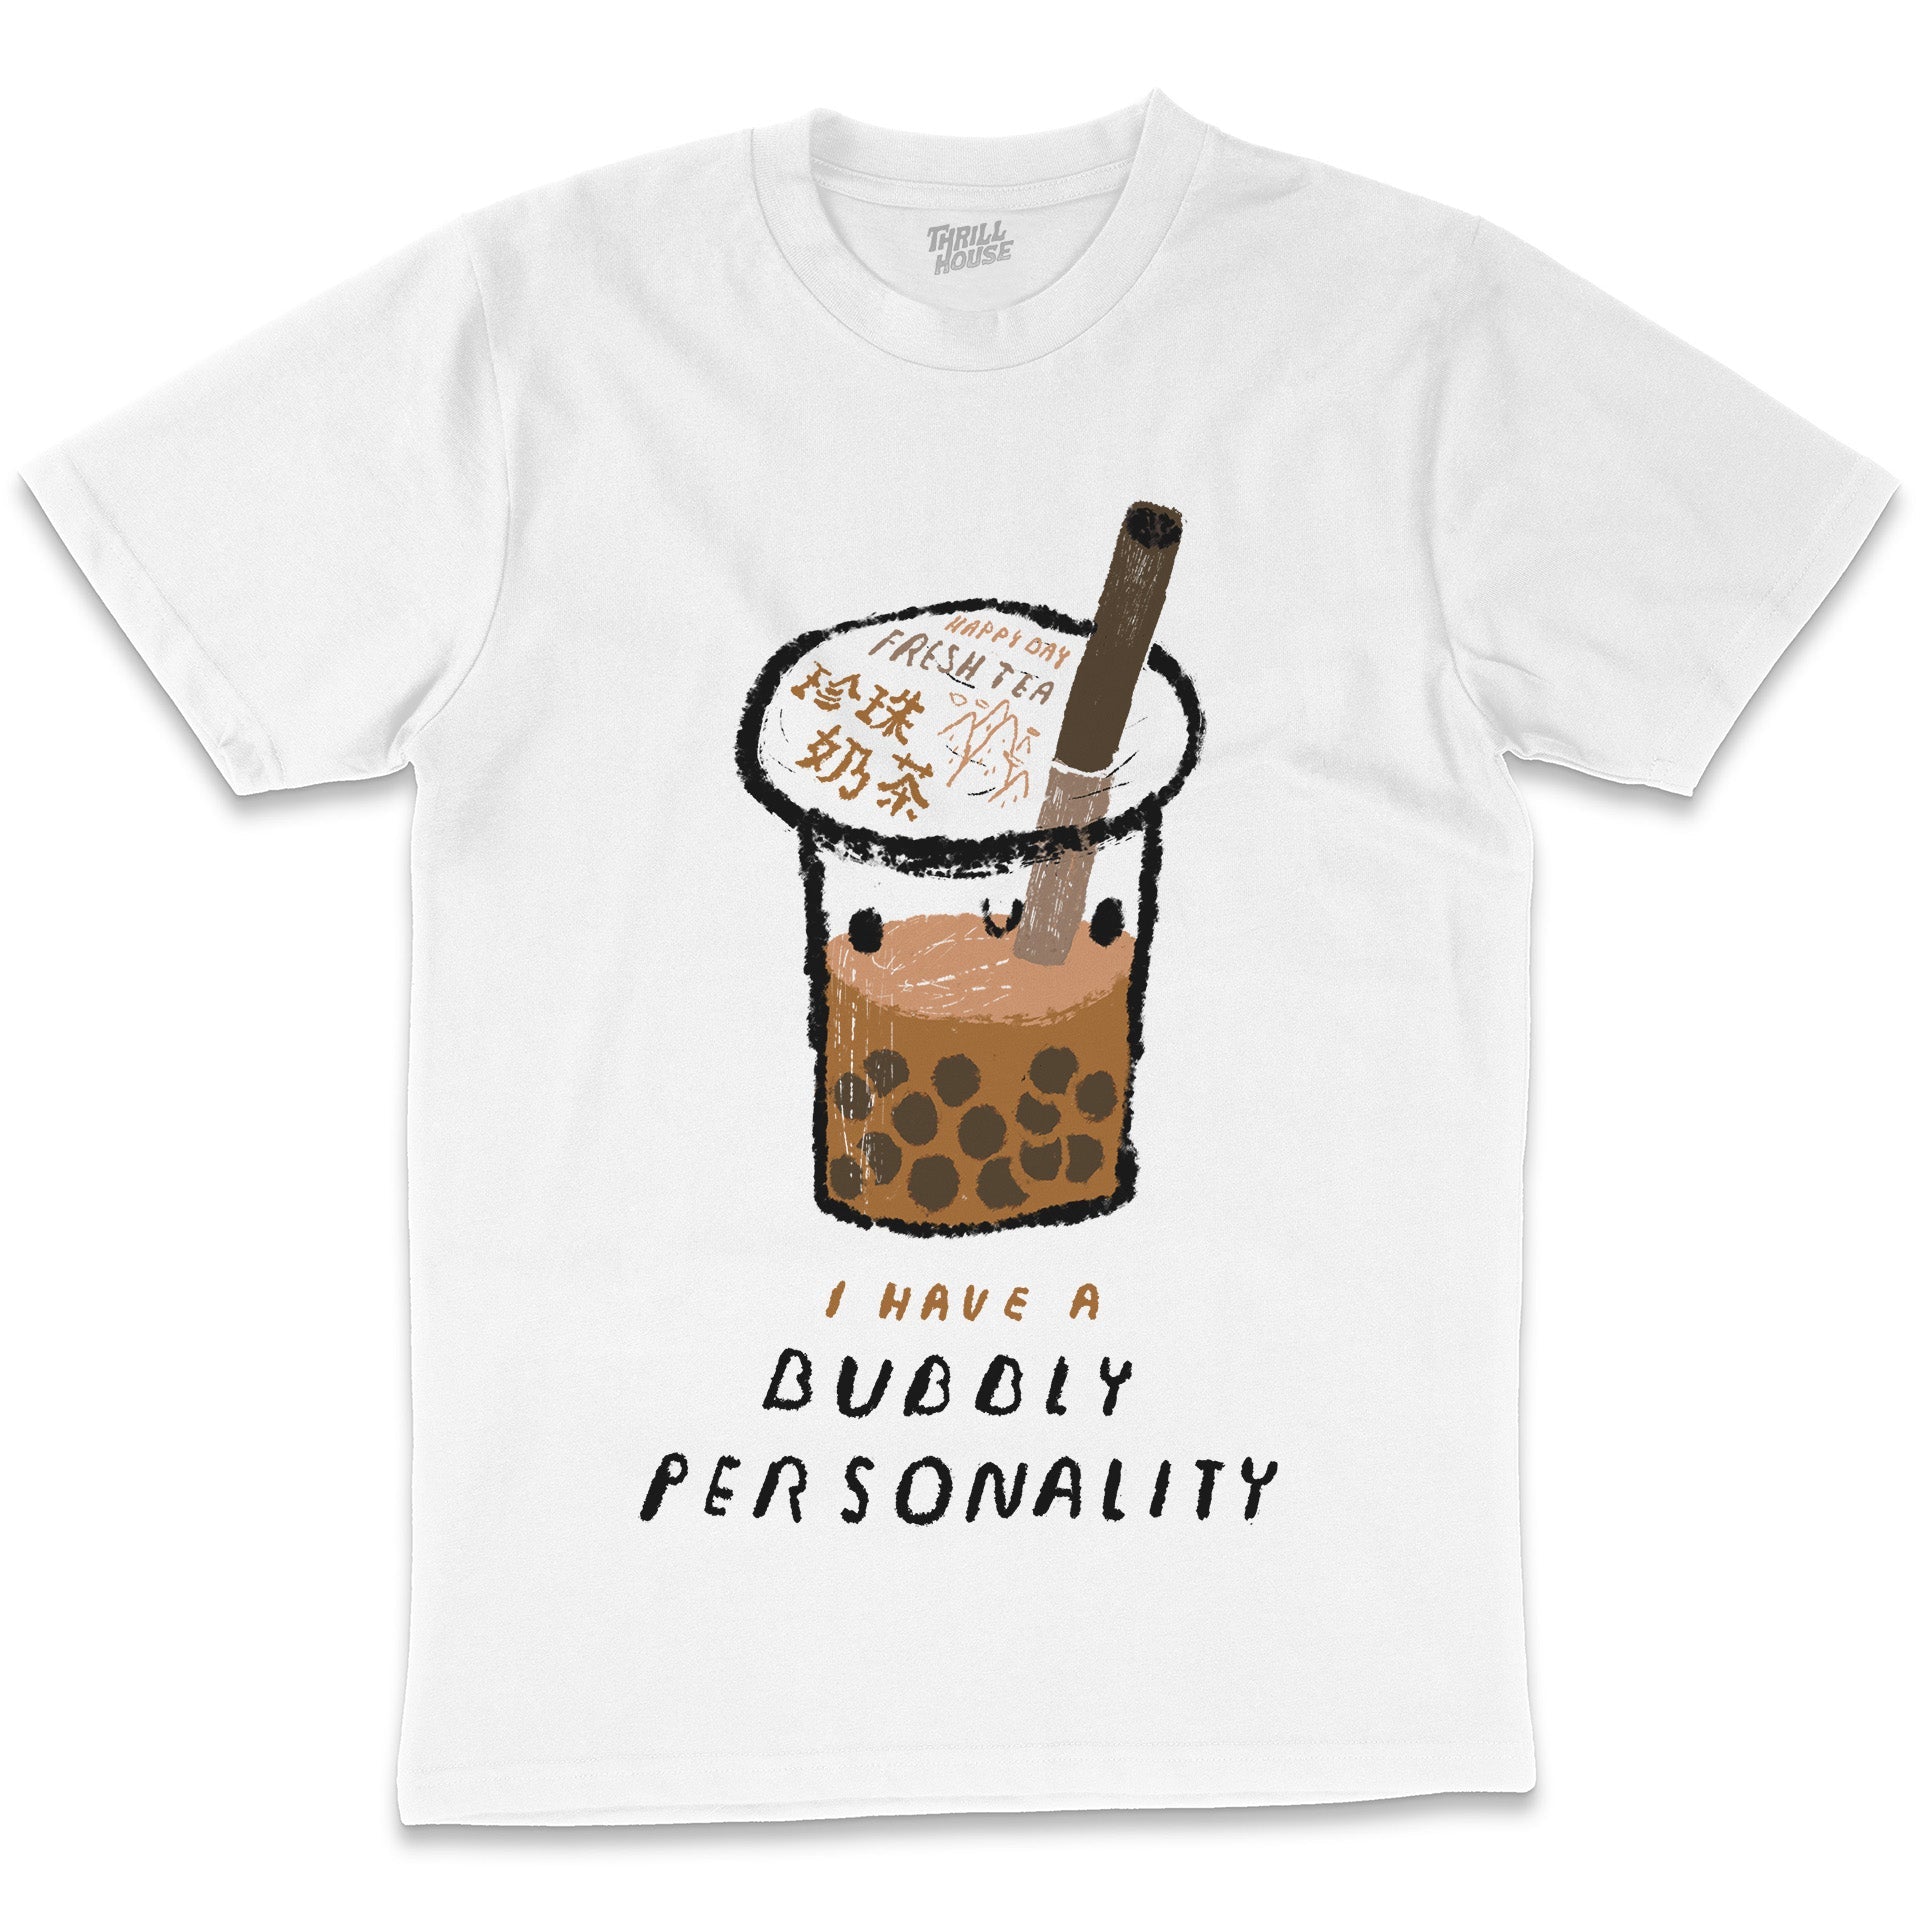 Bubbly Personality Bubble Tea Foodie Drink Funny Pun Cotton T-Shirt